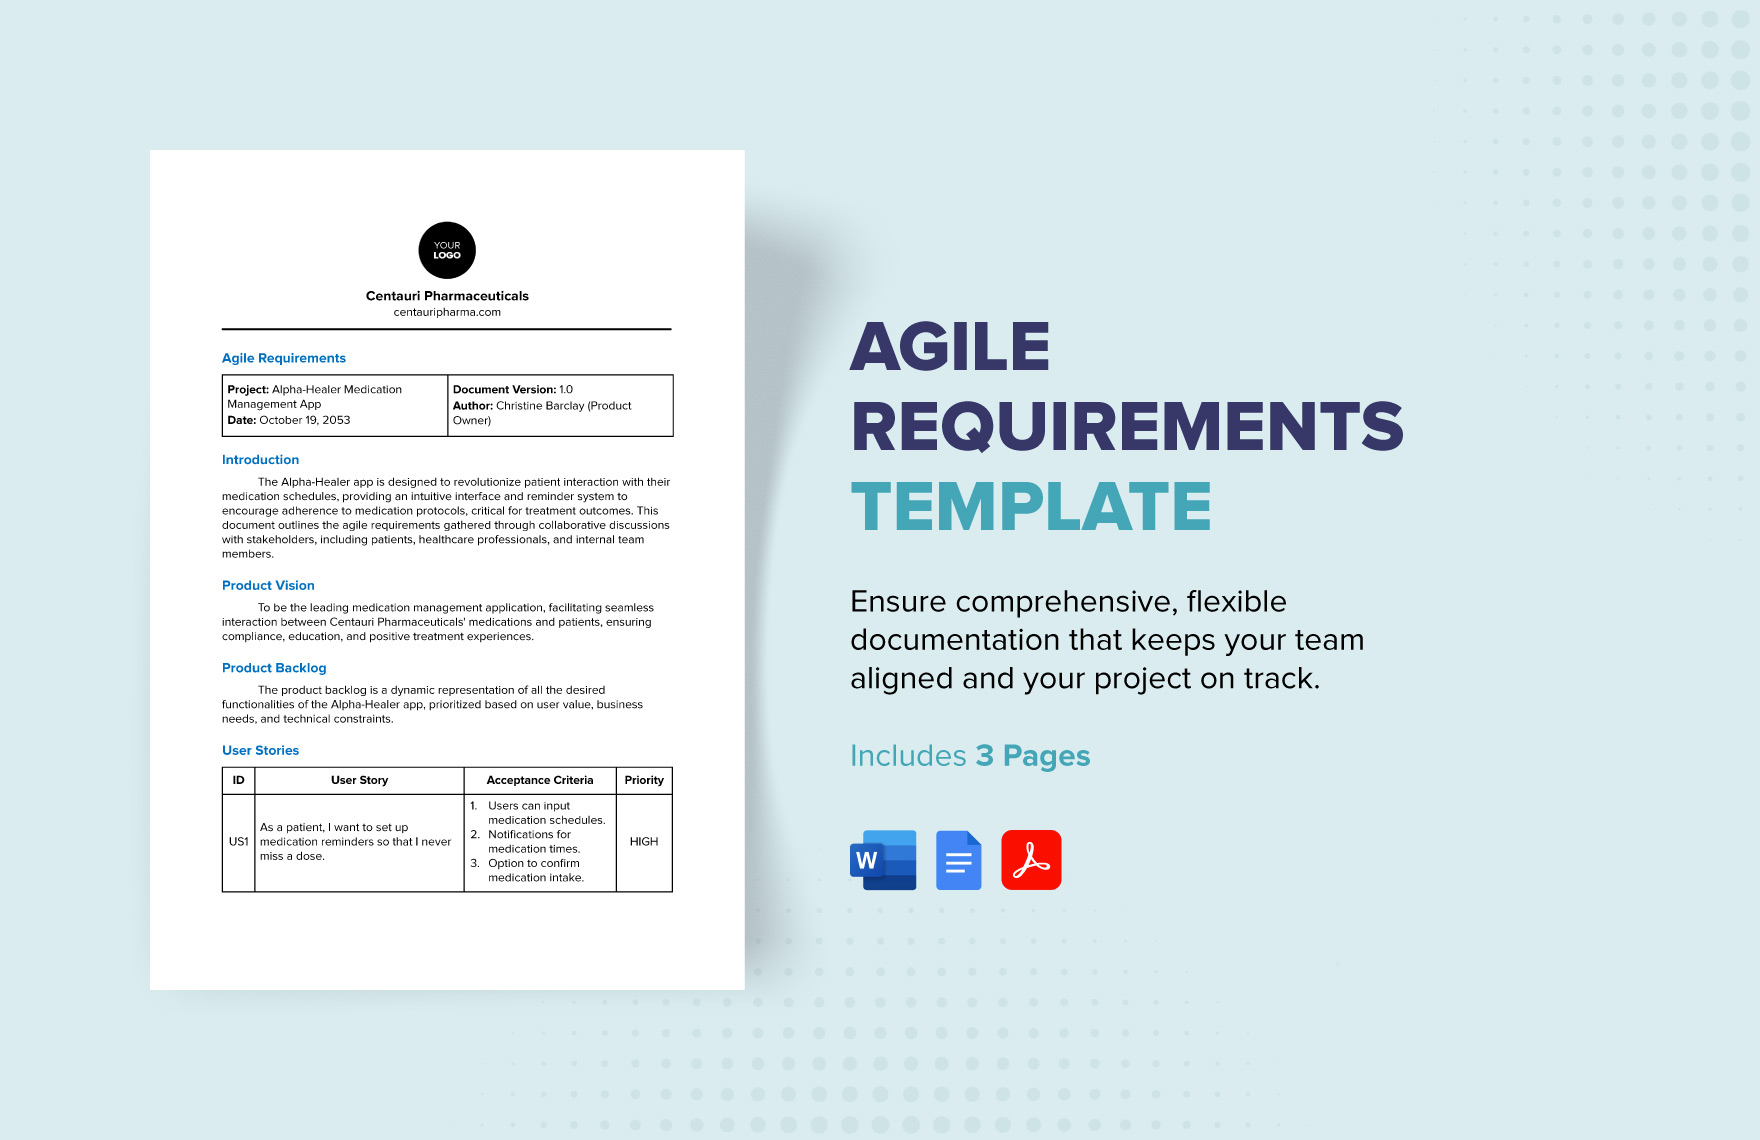 Agile Requirements Template  in Word, Google Docs, PDF